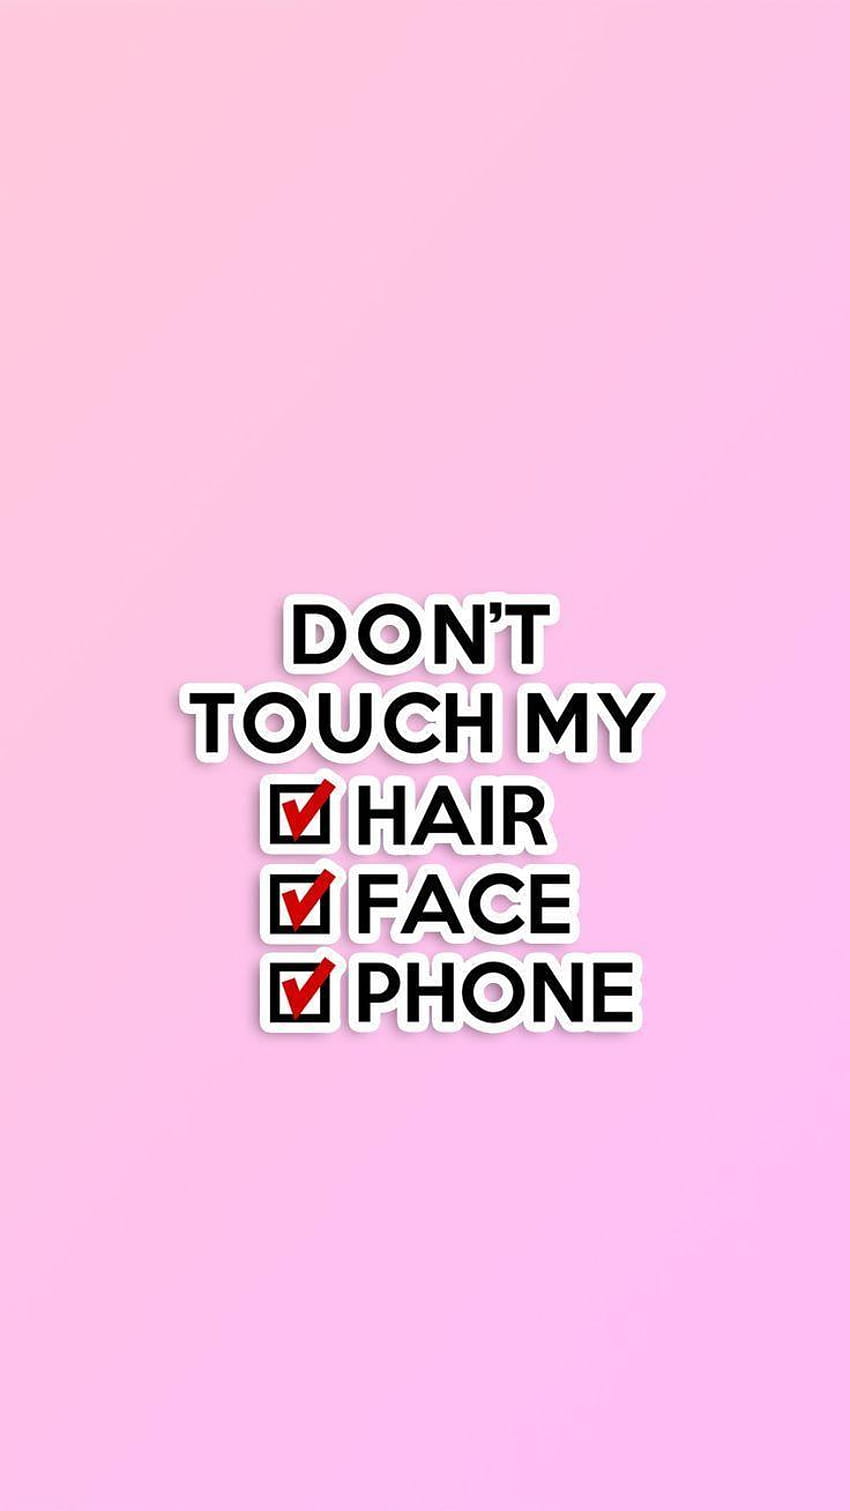 Don T Touch My Phone, dont touch my phone HD phone wallpaper